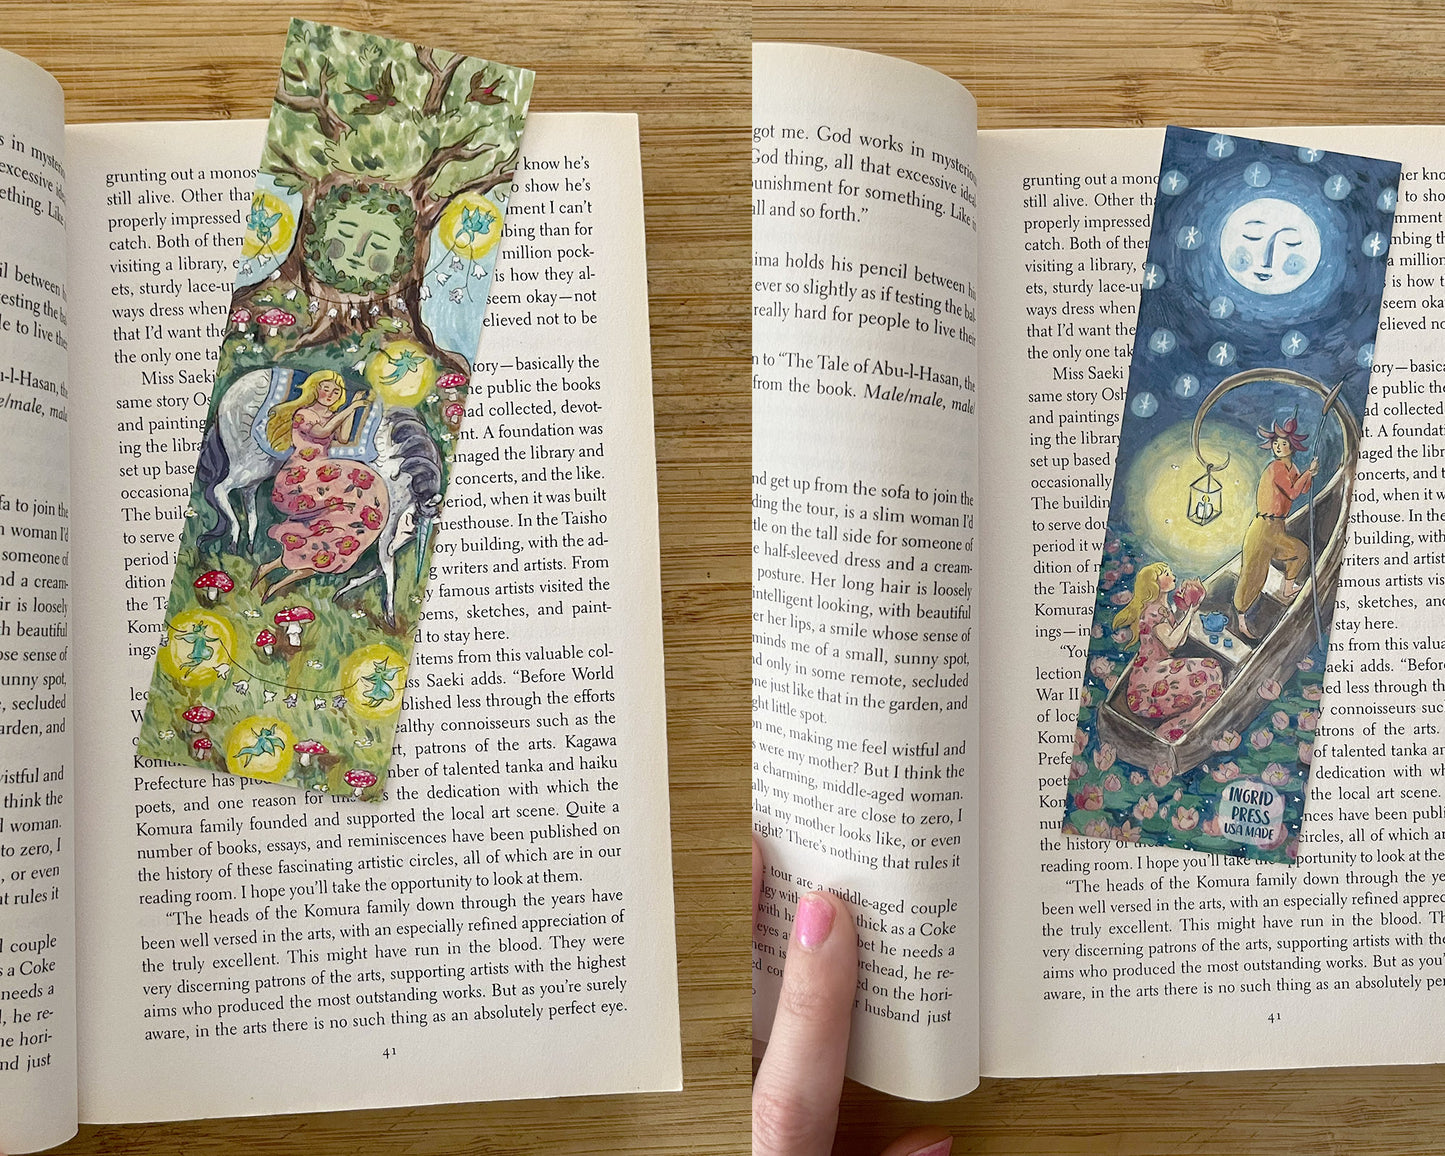 Princess Dream Double-Sided Bookmark